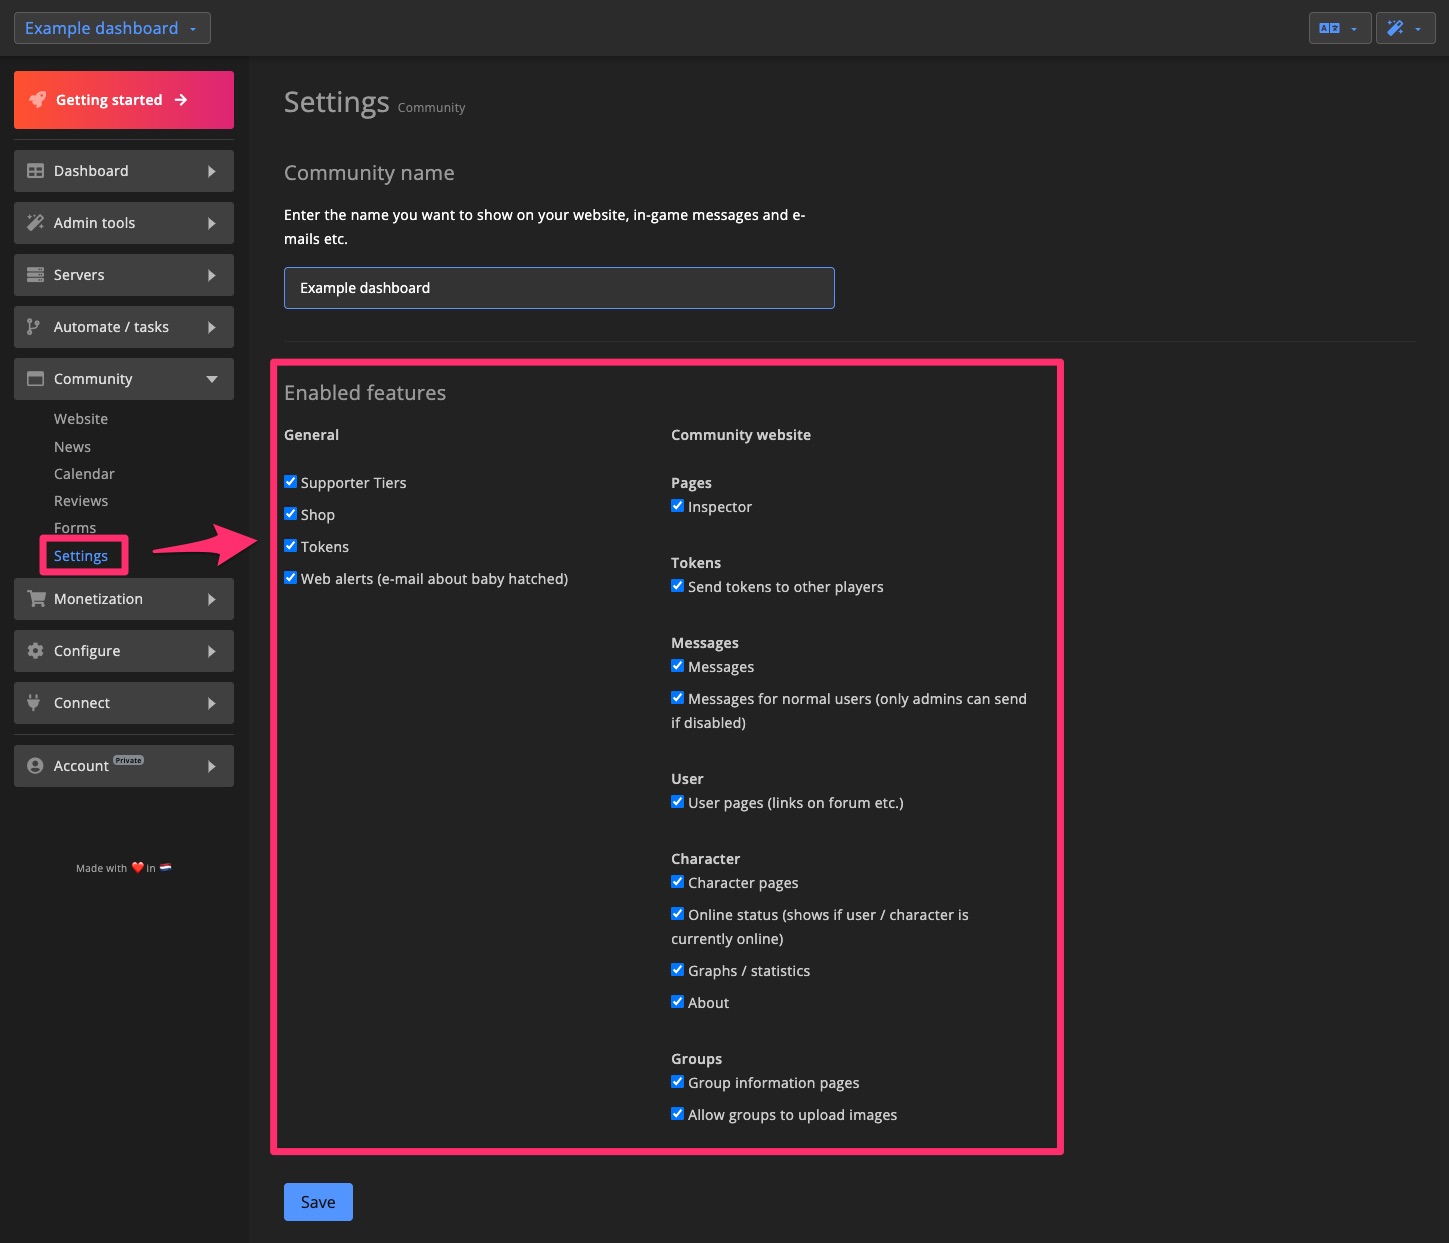 Community - Settings - Enabled features